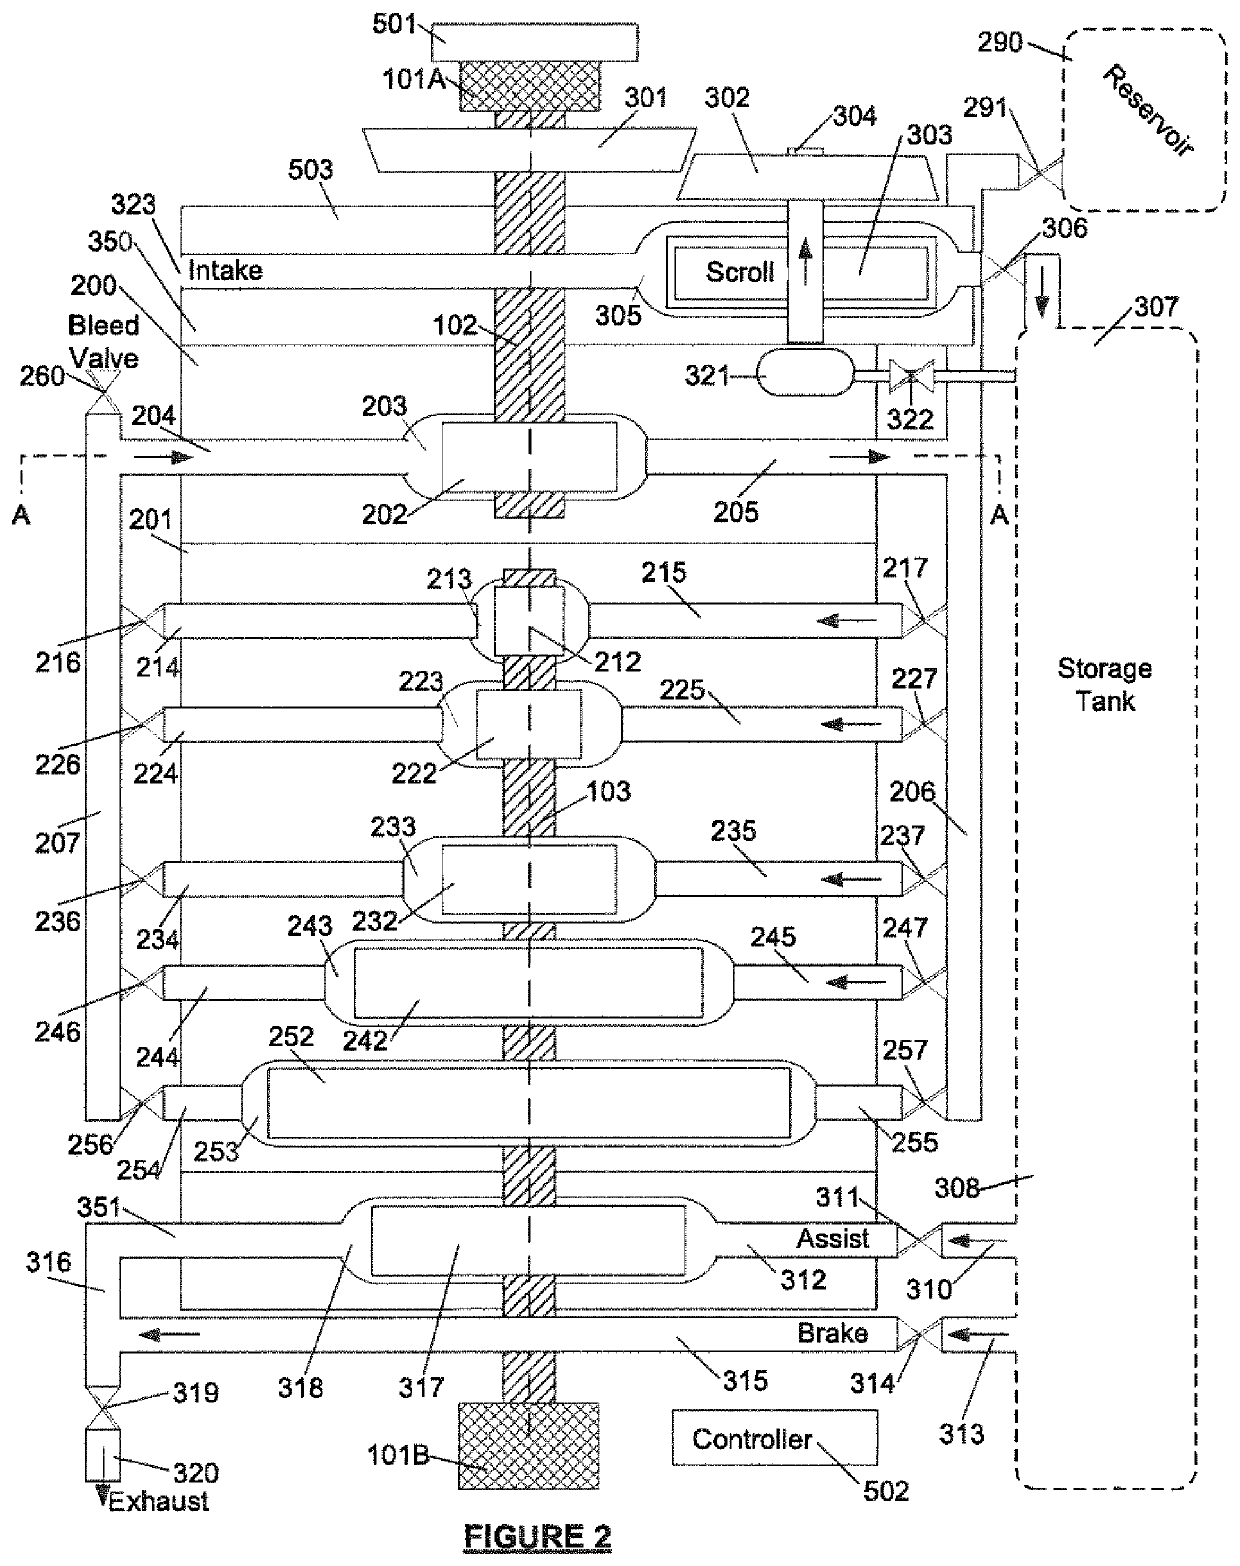 A hydraulic continuous variable speed system having hydraulic and pneumatic speed controls and a method of use